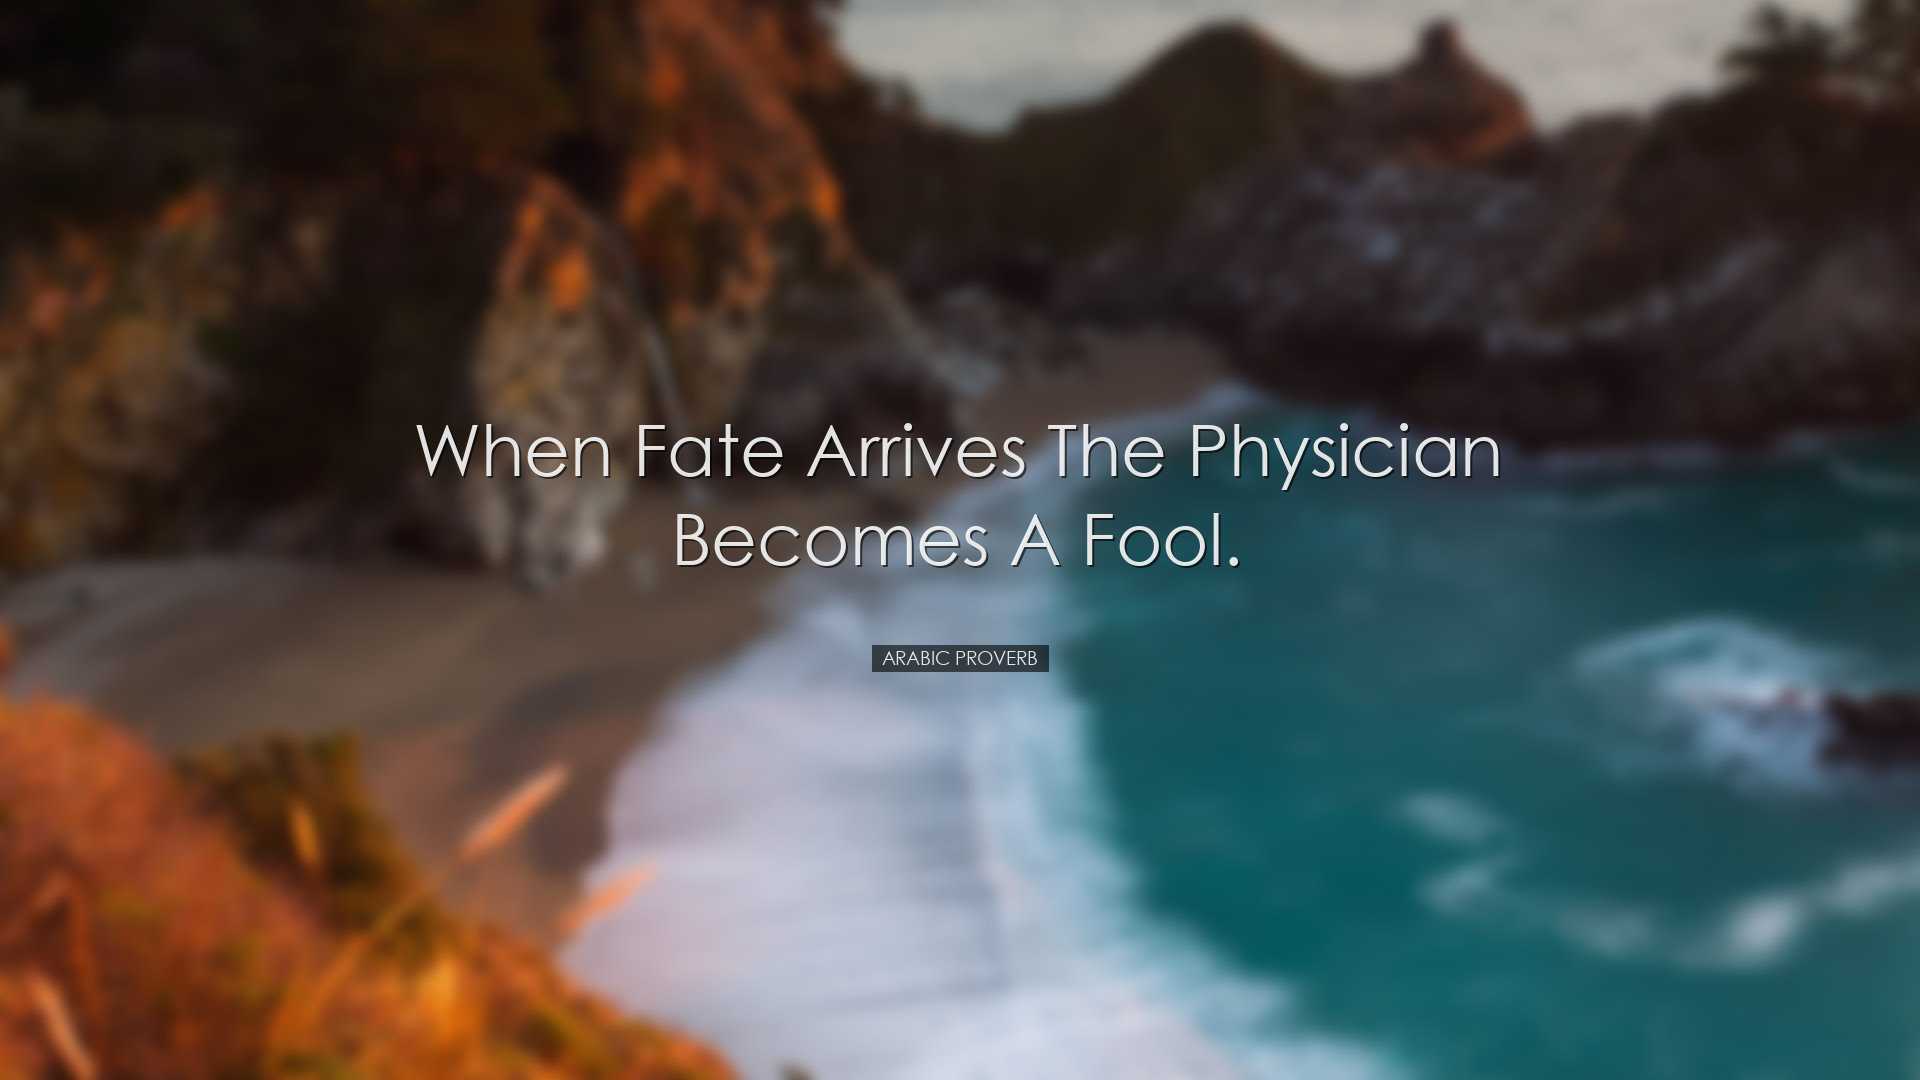 When fate arrives the physician becomes a fool. - Arabic proverb